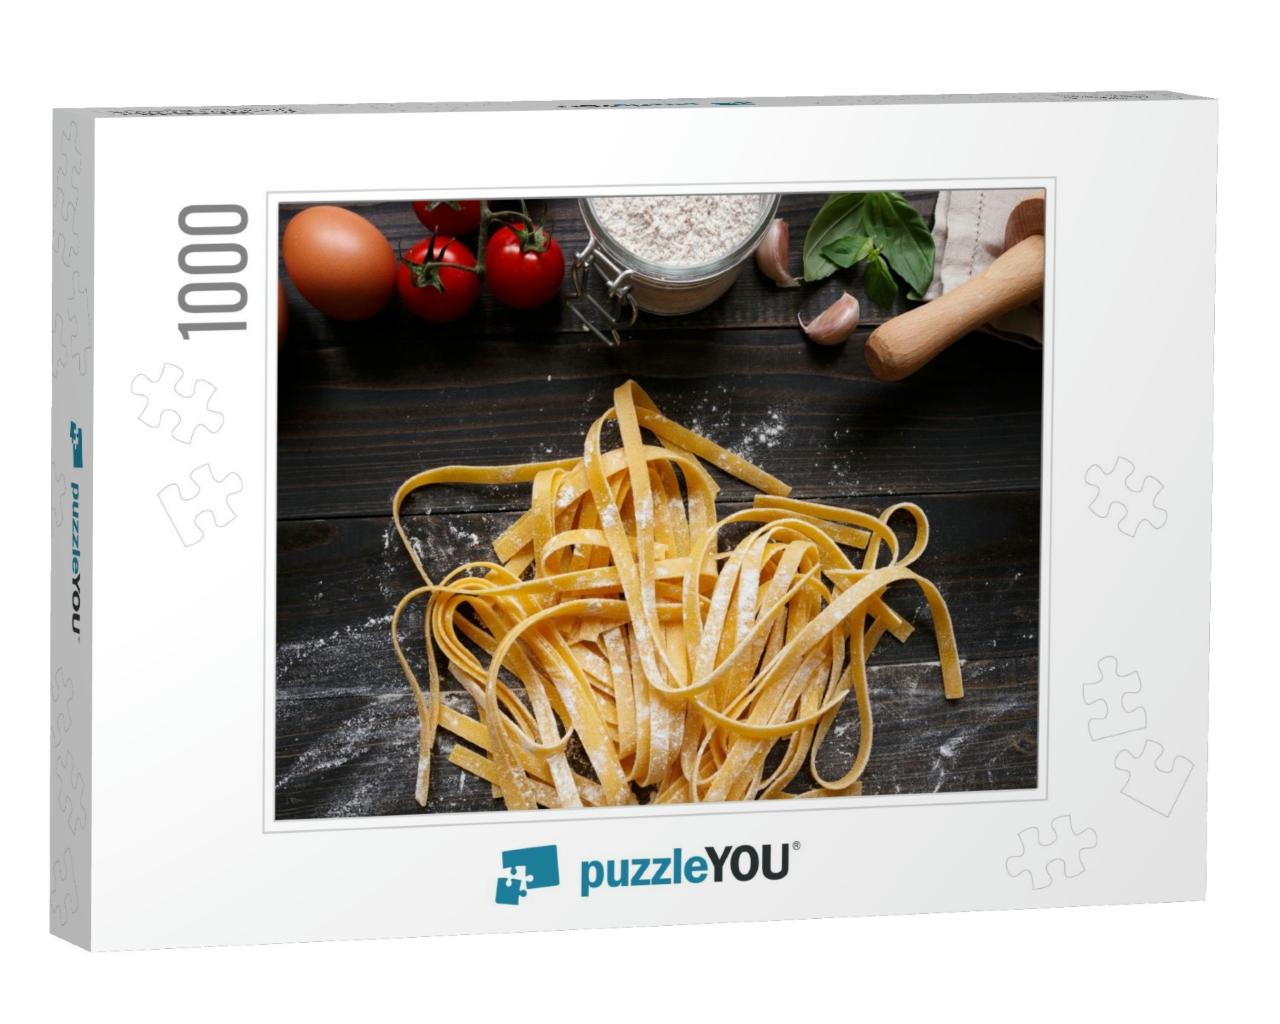 Fresh Homemade Pasta with Pasta Ingredients on the Dark W... Jigsaw Puzzle with 1000 pieces